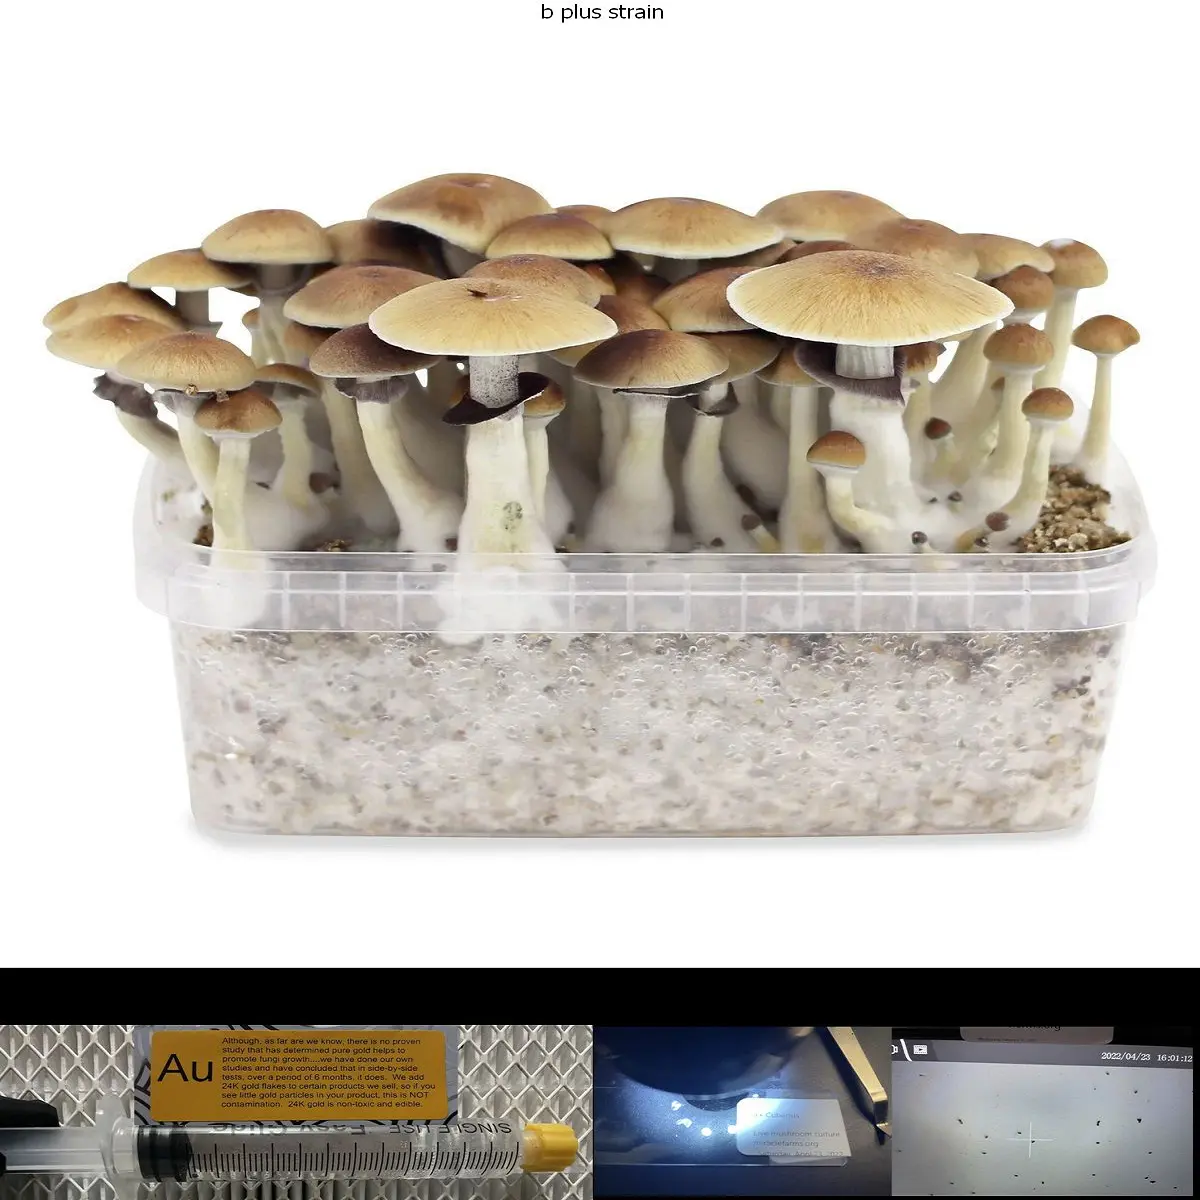 This is our Happy version of our gourmet mushroom site, MiracleFarms.org, and as our URL implies, we sell Golden Teacher mushroom spores, spore swabs, and spore prints along with over 100 other cubensis strains. We have been in business since 2005 and although we grow over 100 gourmet stains in our Florida-based lab/farm, we source all our psychedelic and cubensis spores from two well established distributors based in Amsterdam, Netherlands. We pride ourselves on always providing high-quality, contaminate-free spore syringes, spore swabs, and spore prints. All our products are produced in our clean room, in front of a laminar flow hood, and in full PPE. We use high-quality materials in all our products and every order is sealed in a discrete, tamperproof holographic mylar container (see products photos). Our spore syringes, swabs, and prints are no older than 60 days and are close to contaminate-free as we can make them. No compony can claim 100% contamination free, especially when dealing with spores, however with almost two decades of experience, we now come pretty close.